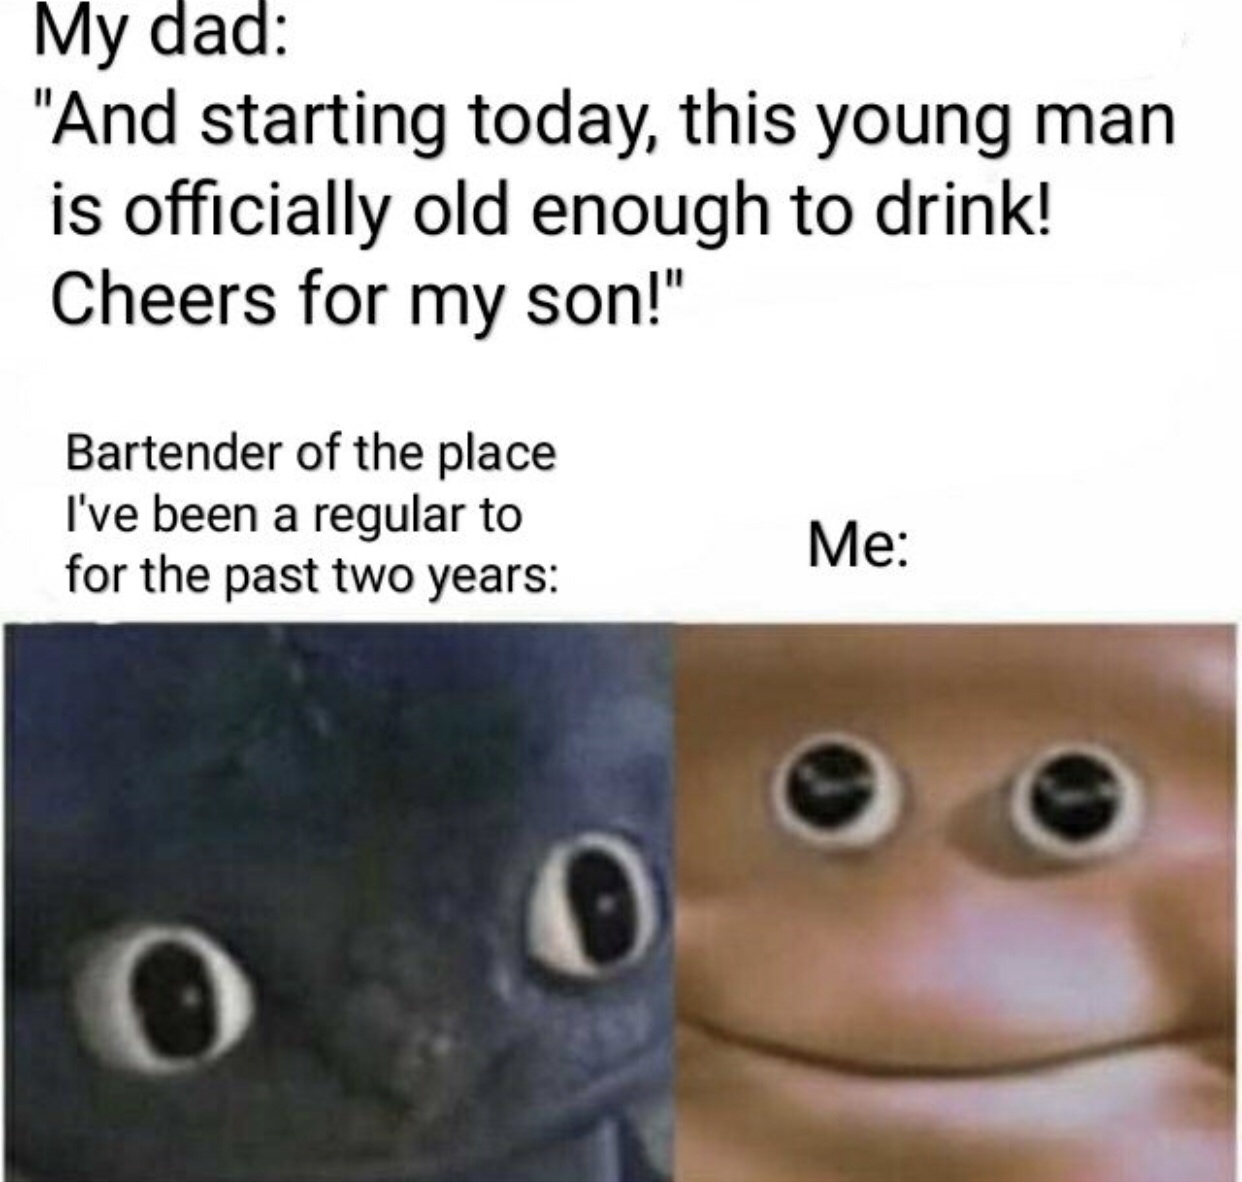 r suddenlygay - My dad "And starting today, this young man is officially old enough to drink! Cheers for my son!" Bartender of the place I've been a regular to for the past two years Me